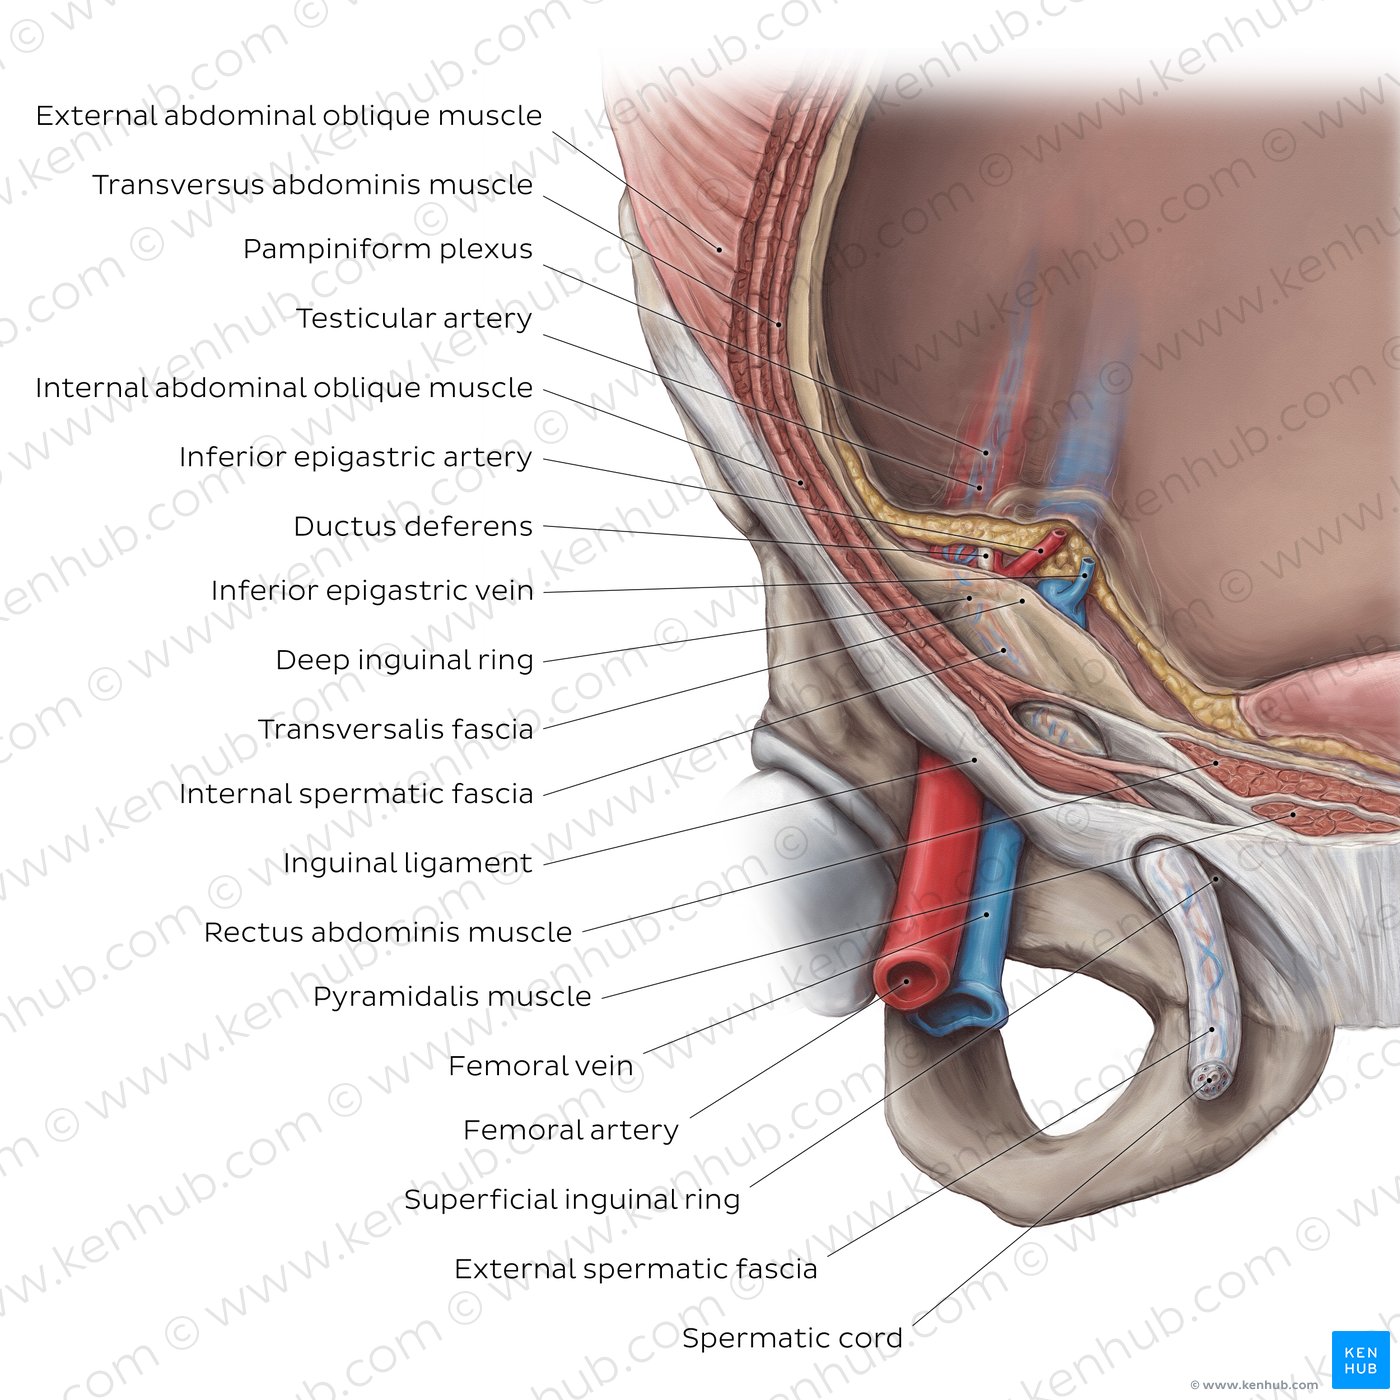 Inguinal canal (overview)